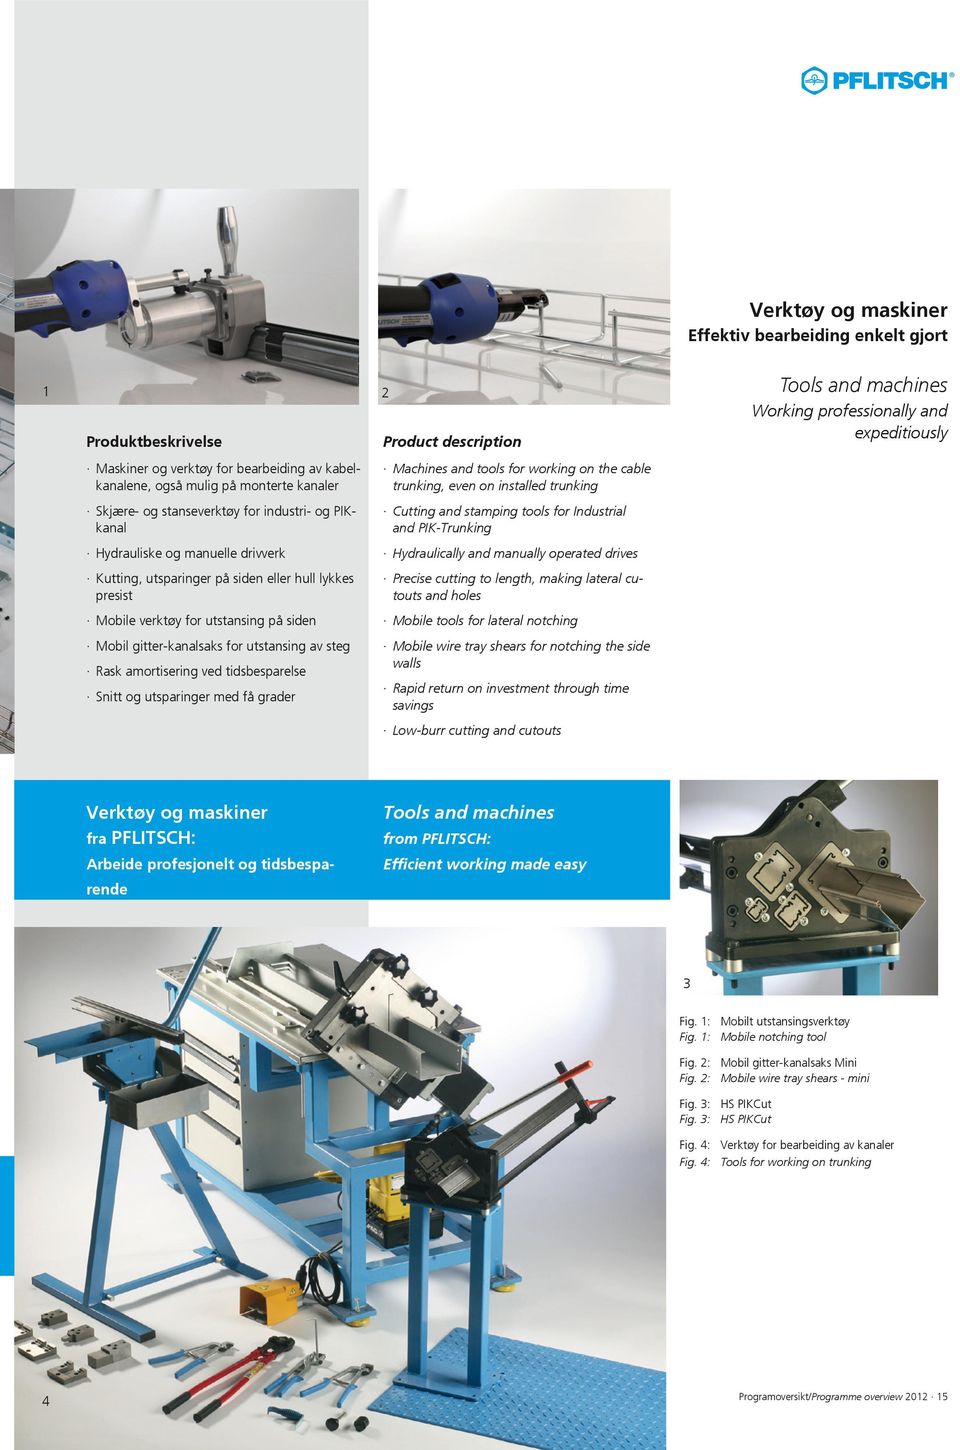 Hydrauliske og manuelle drivverk Hydraulically and manually operated drives Kutting, utsparinger på siden eller hull lykkes presist Precise cutting to length, making lateral cutouts and holes Mobile